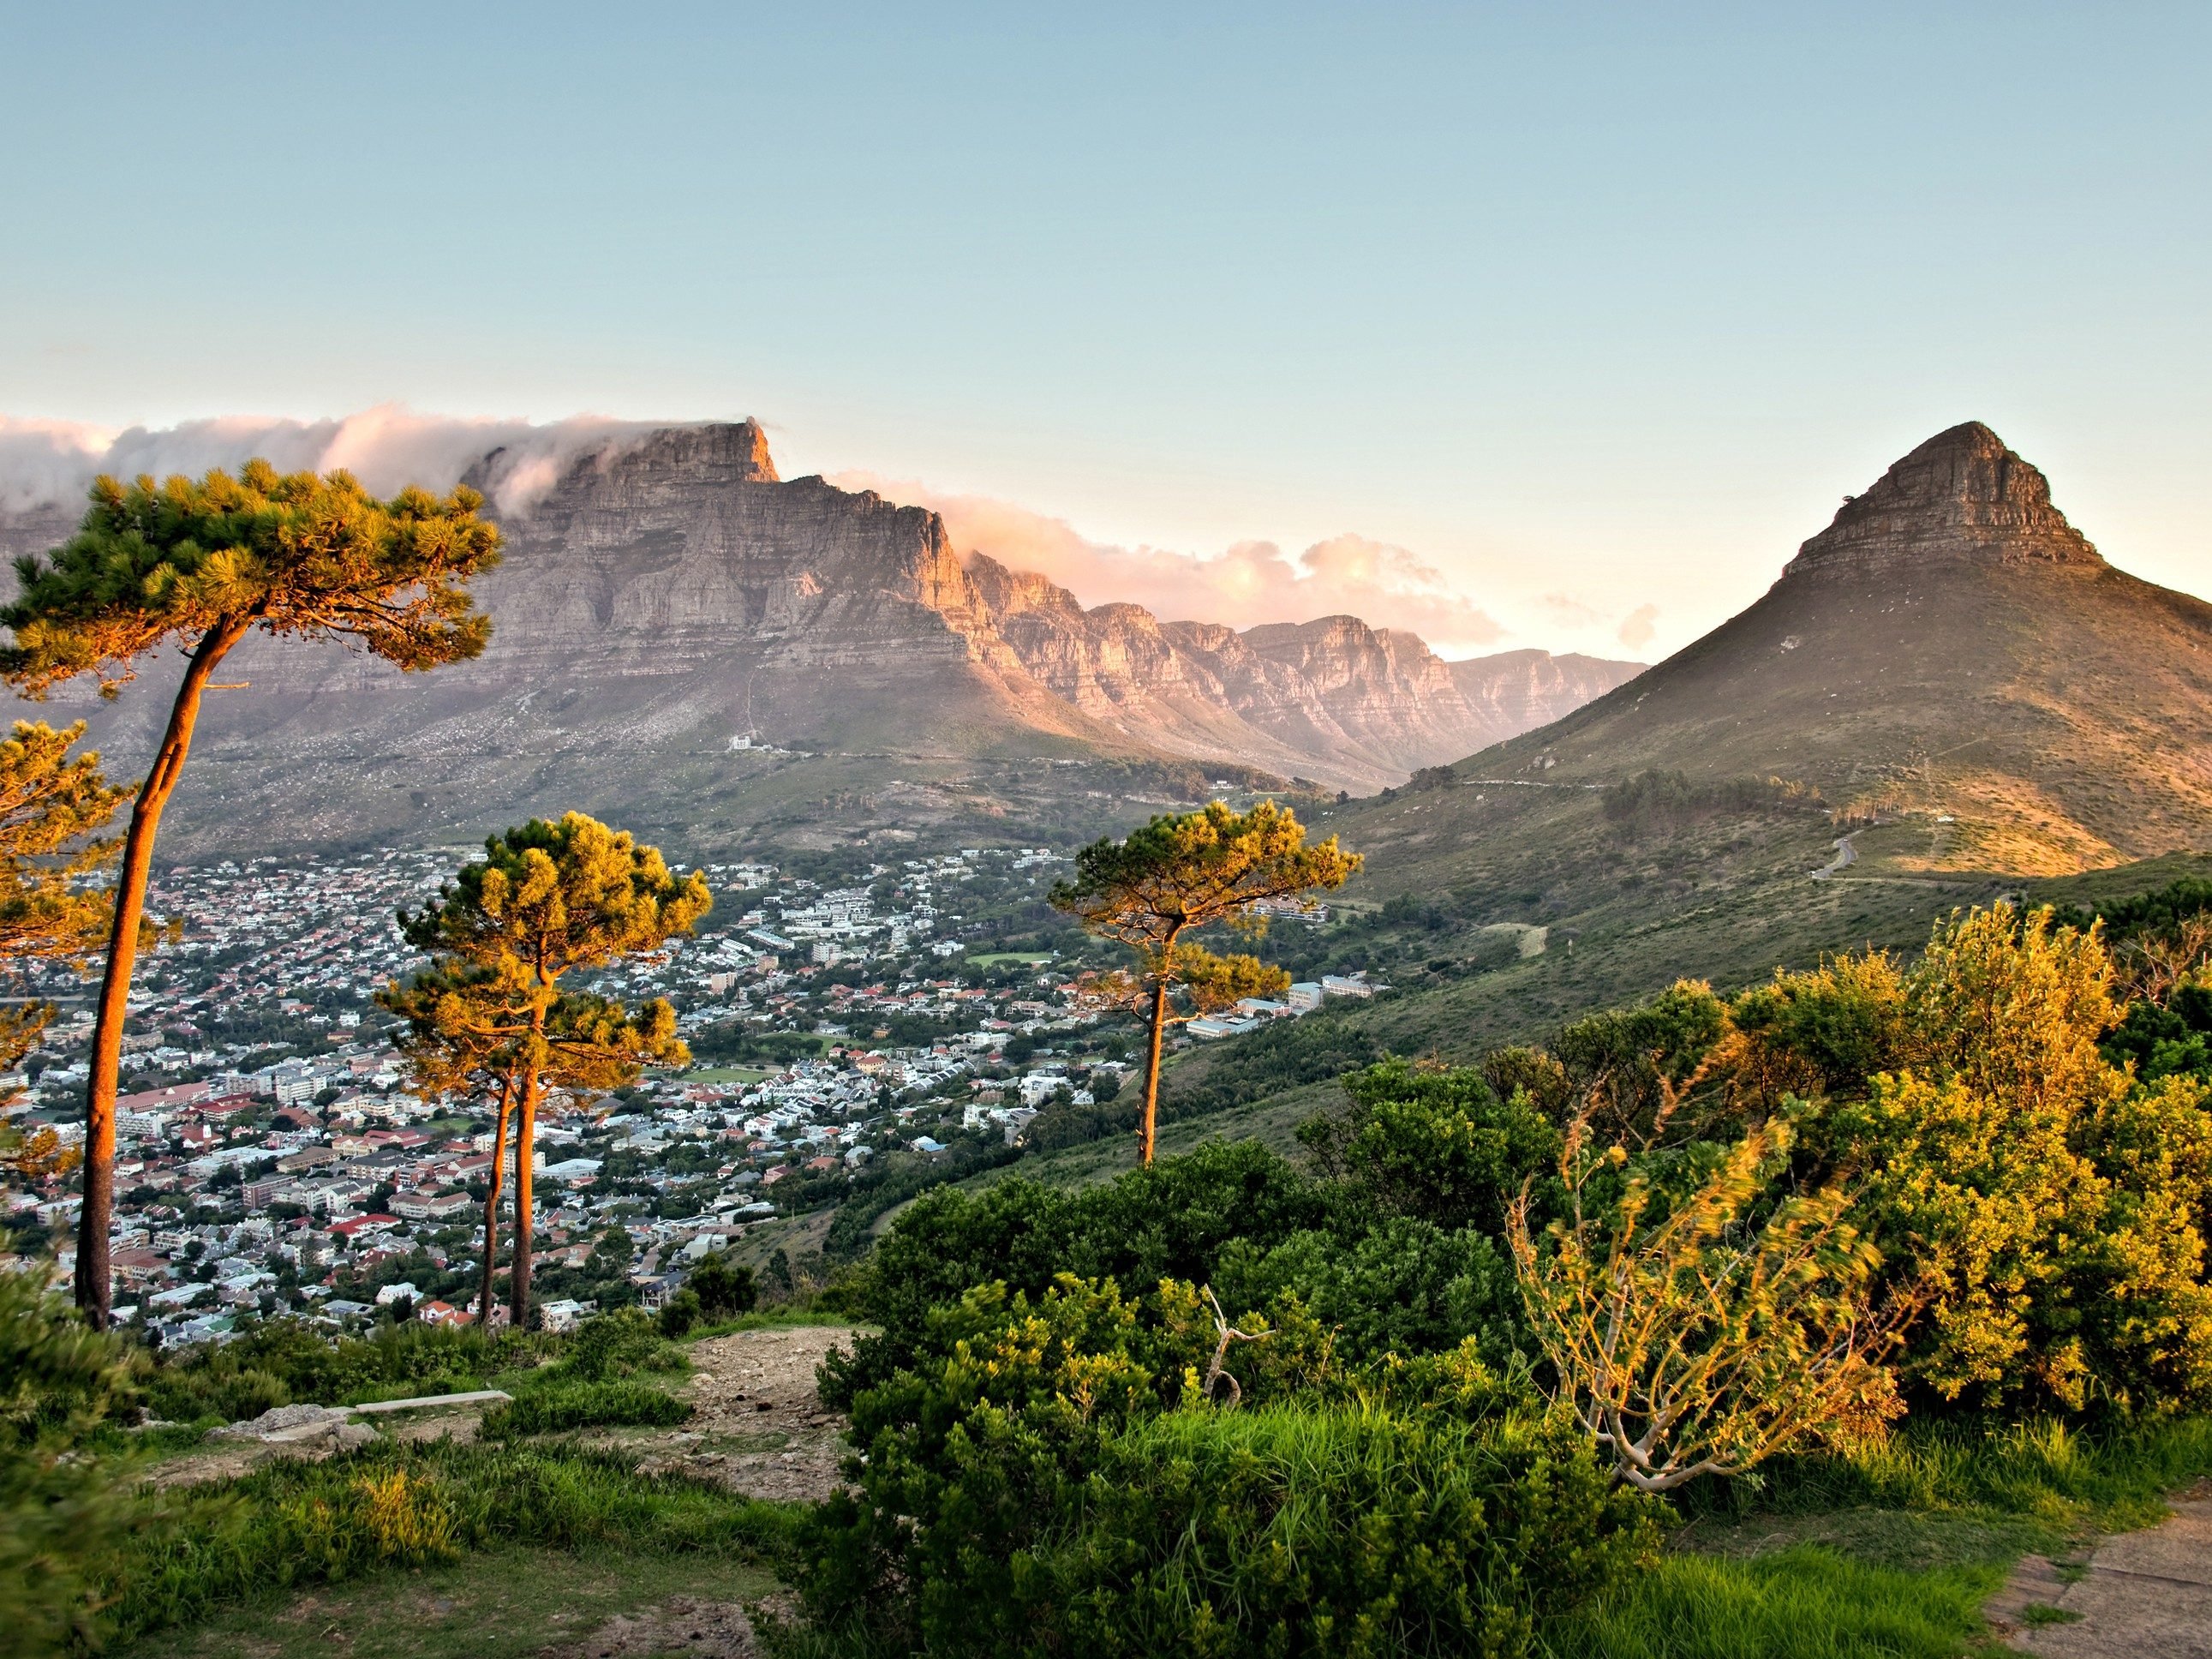 5. South Africa